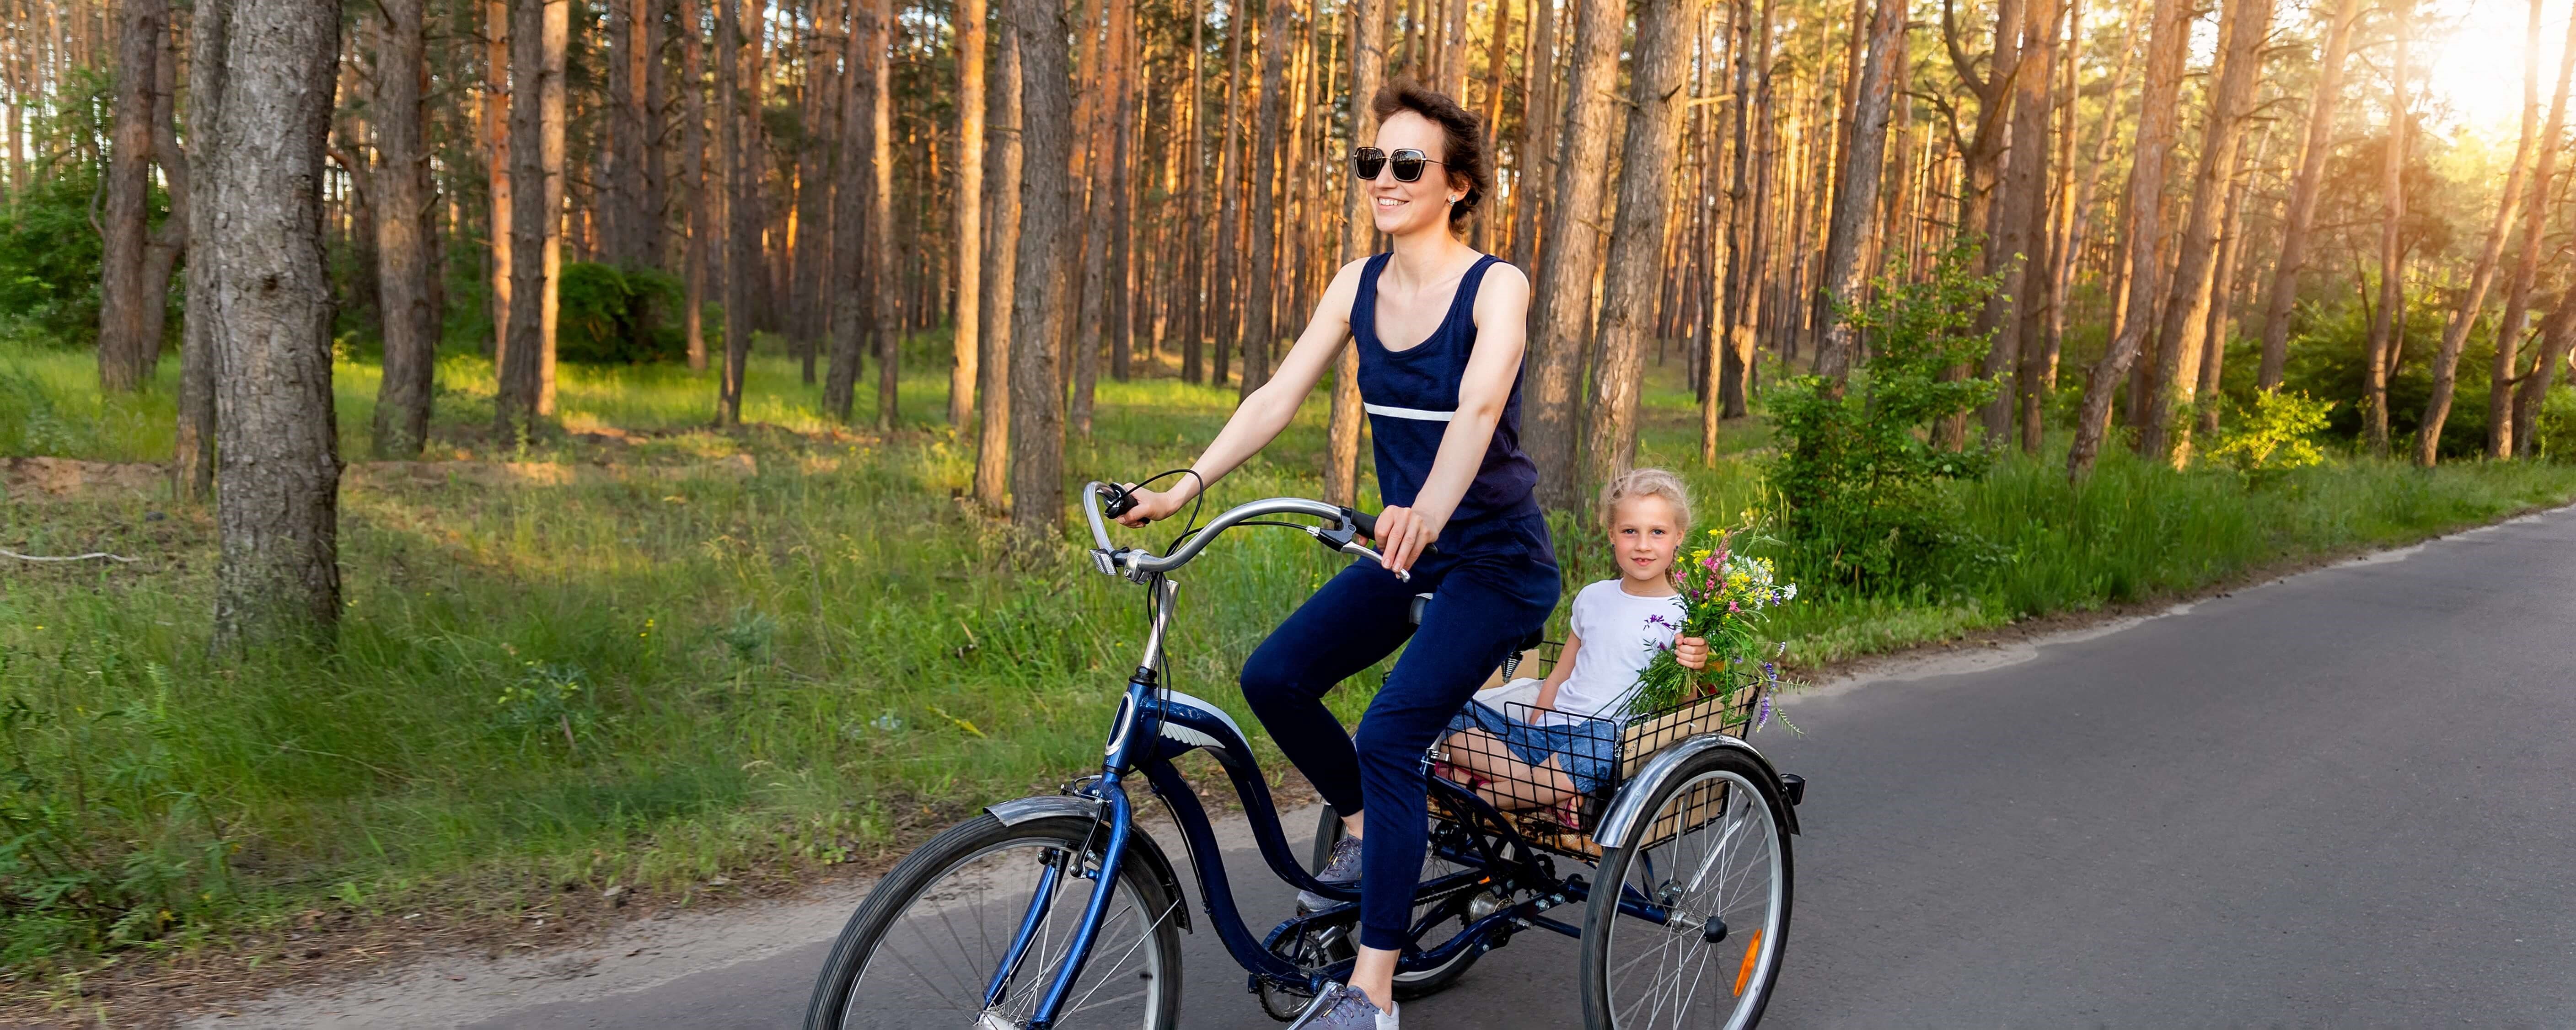 woman riding bike with child in wooded area